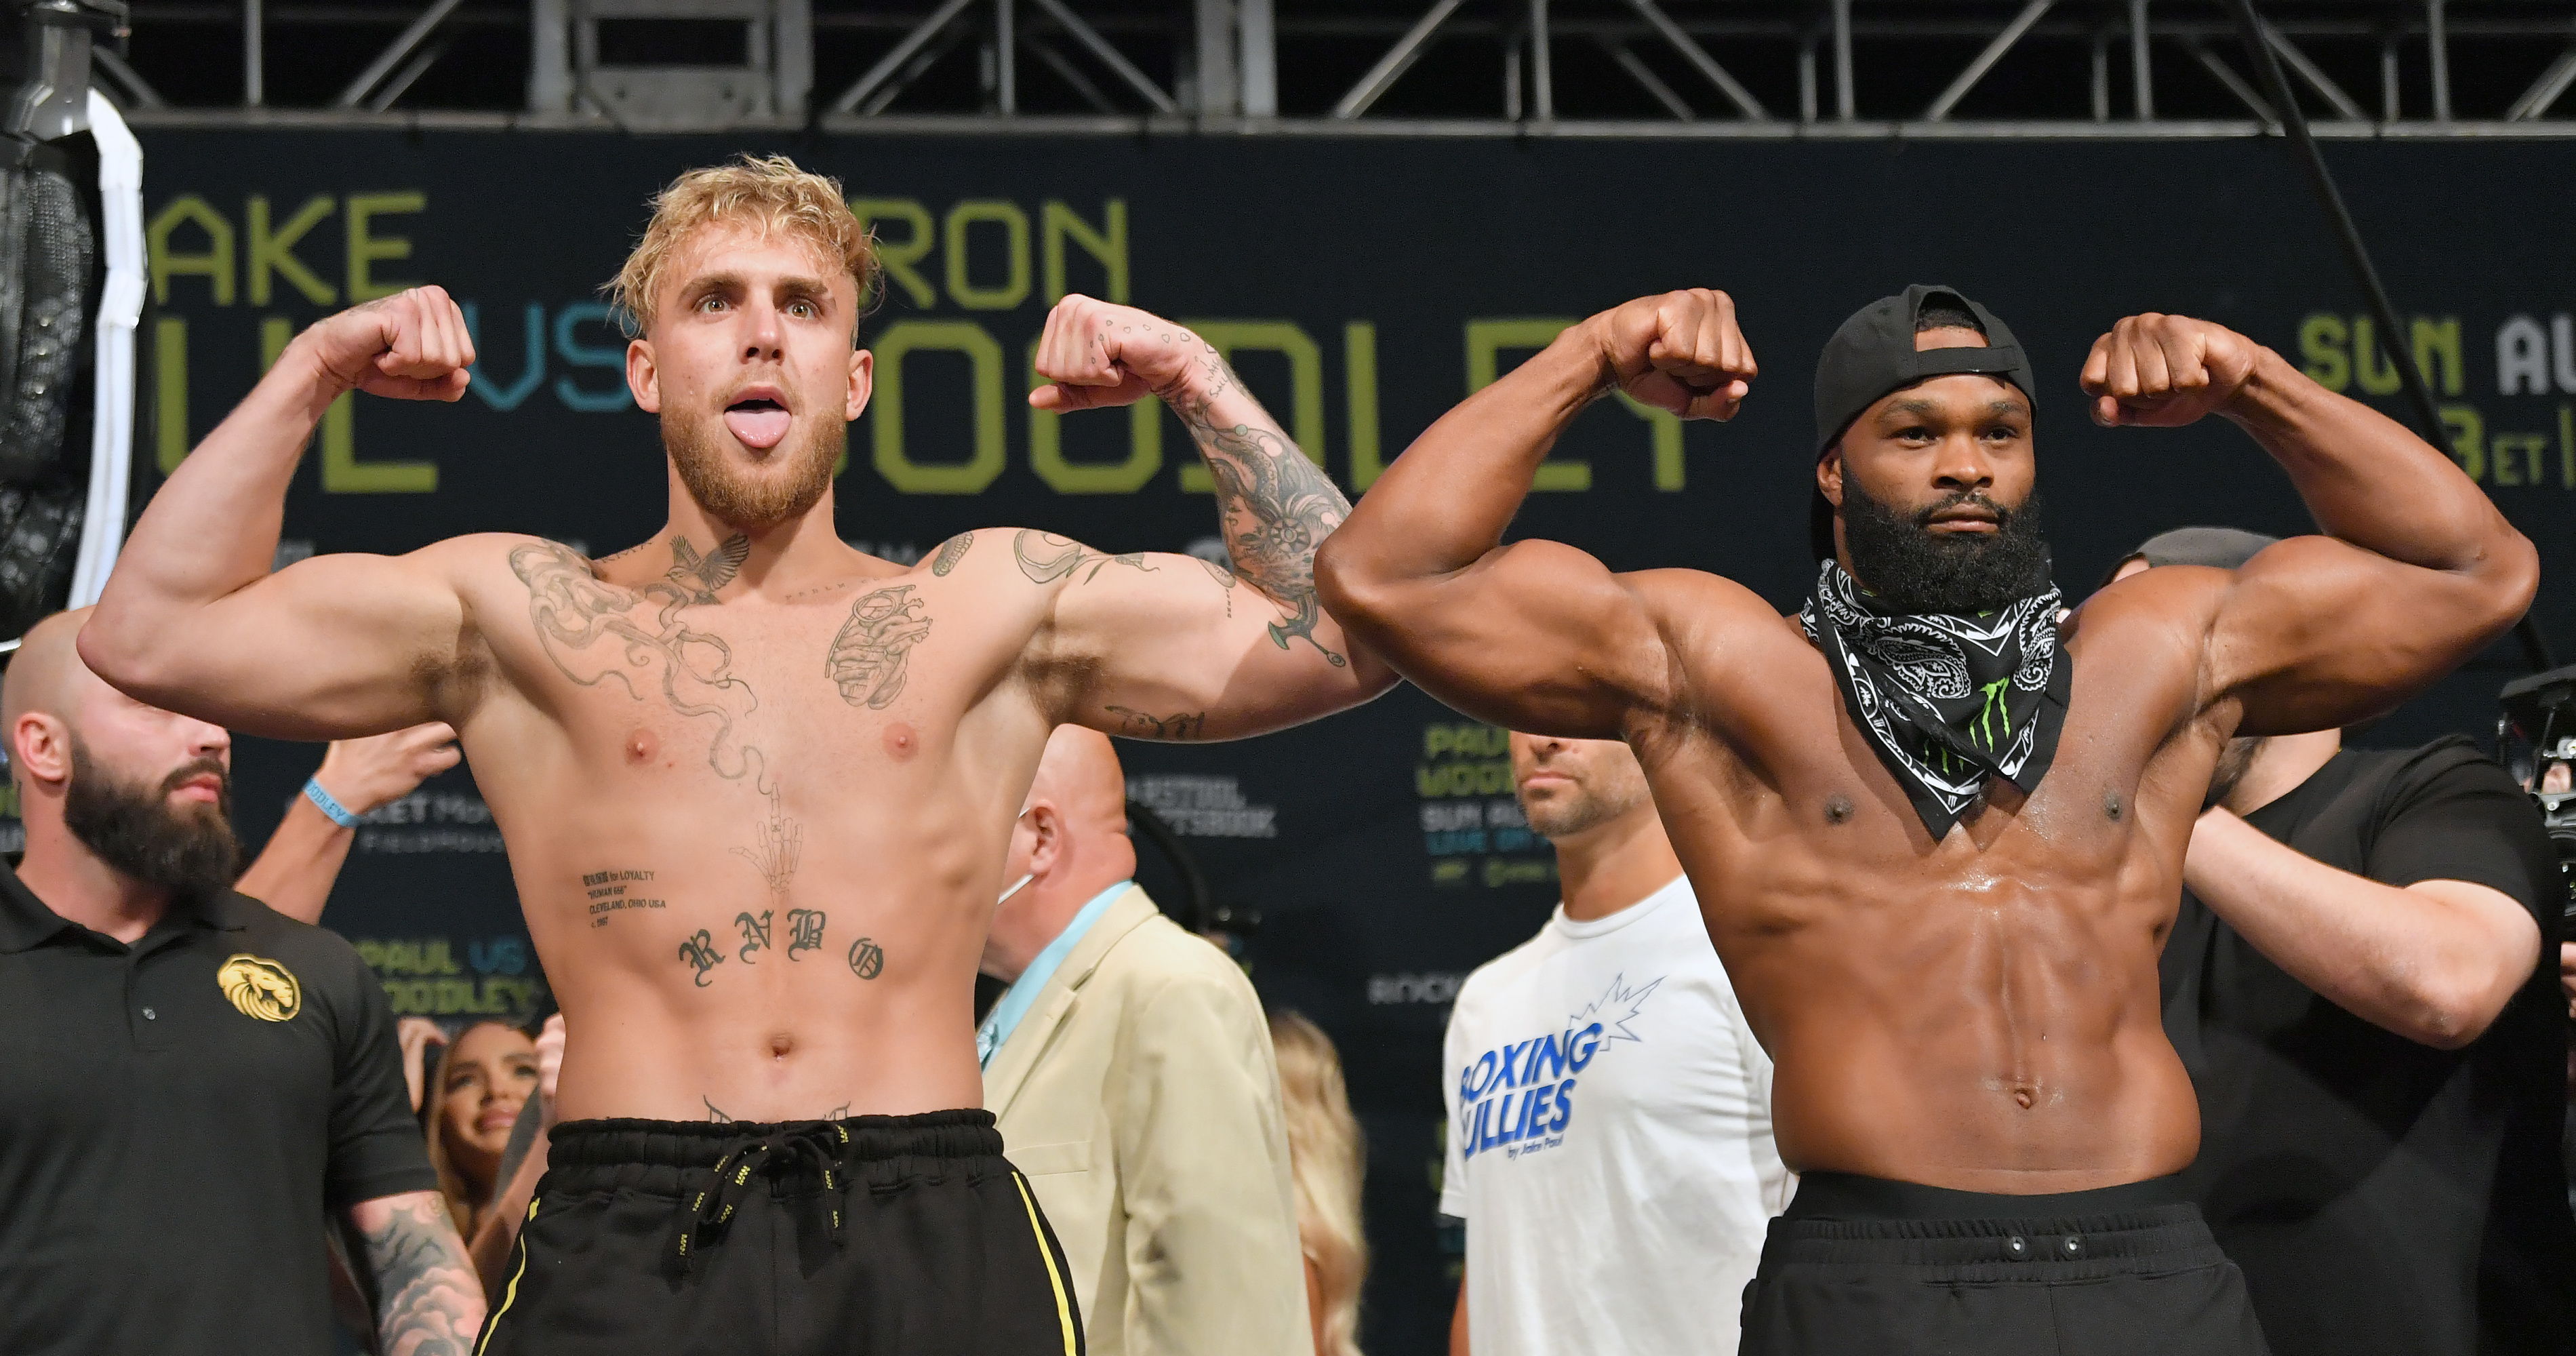 I'm too f***ing good at this sport' - Jake Paul shows off bulked